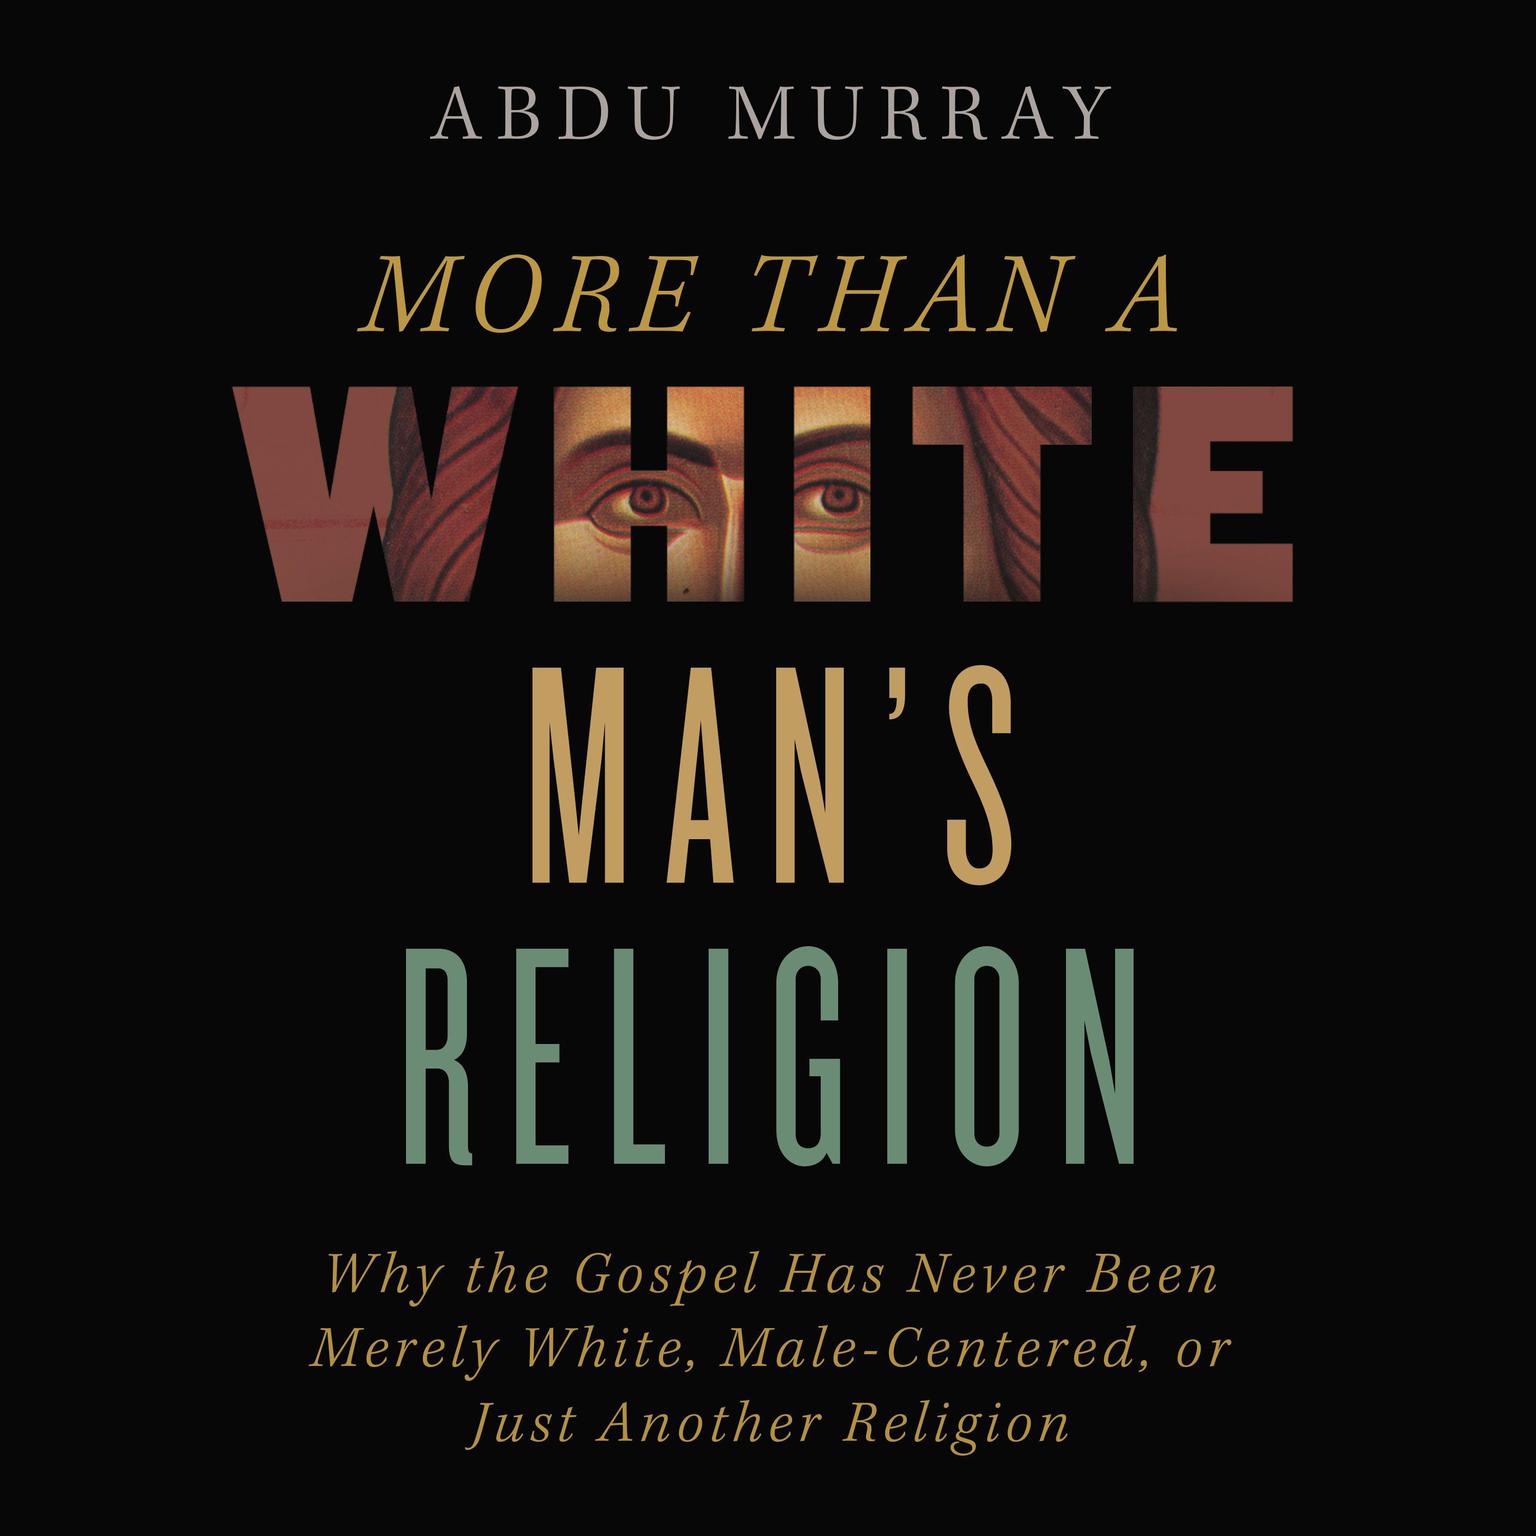 More Than a White Mans Religion: Why the Gospel Has Never Been Merely White, Male-Centered, or Just Another Religion Audiobook, by Abdu Murray